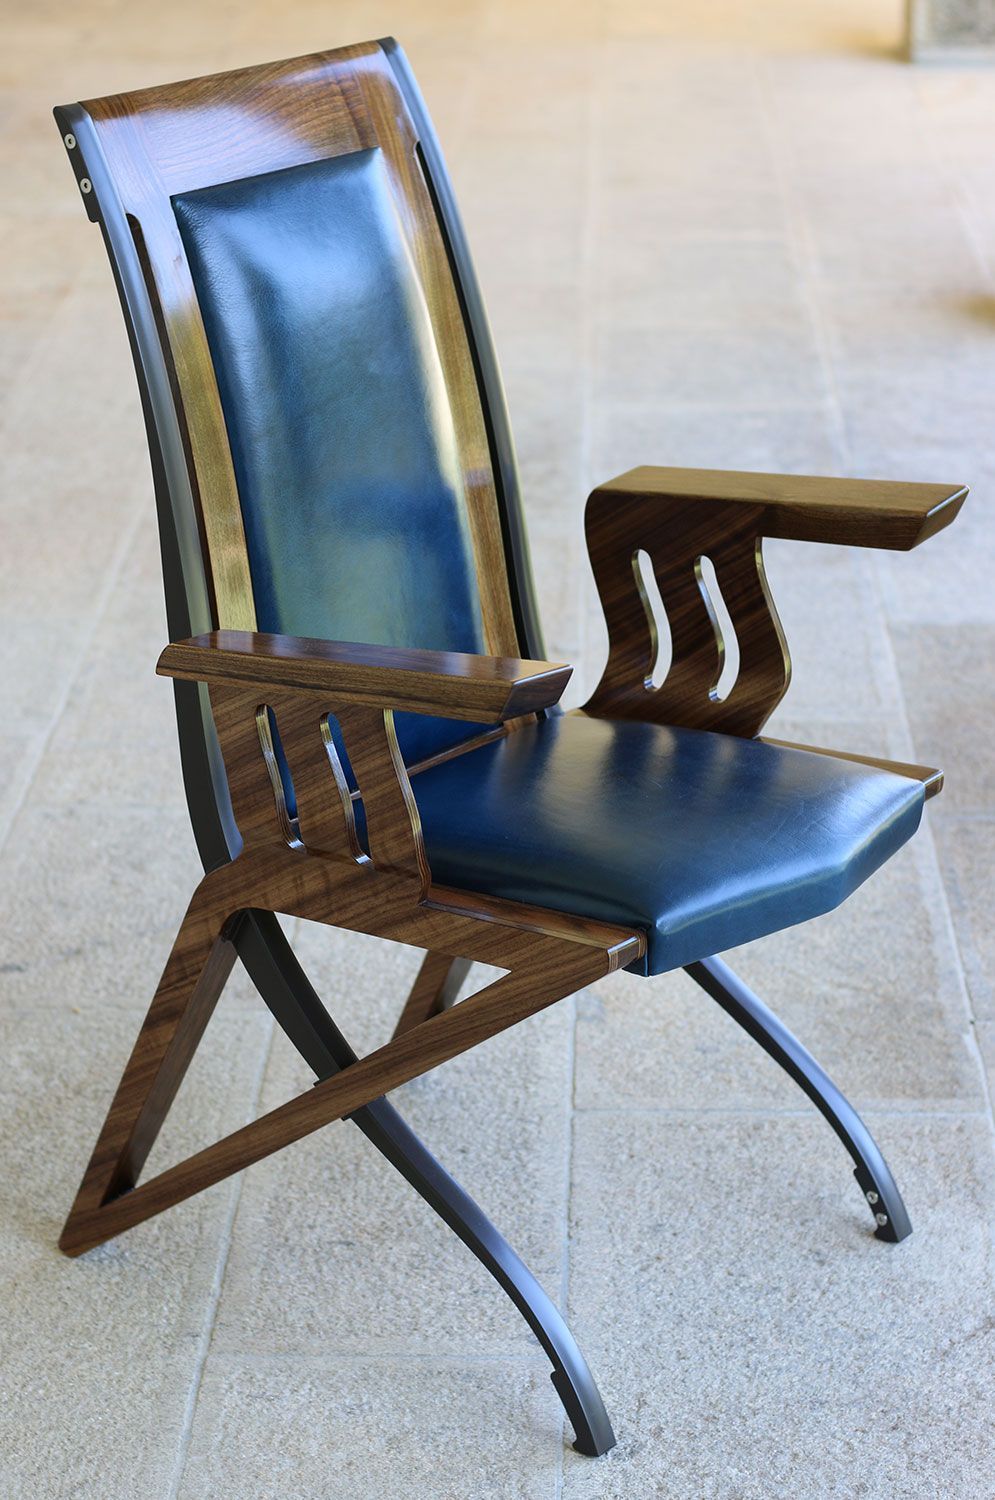 A high end wooden chair with a blue leather seat and back